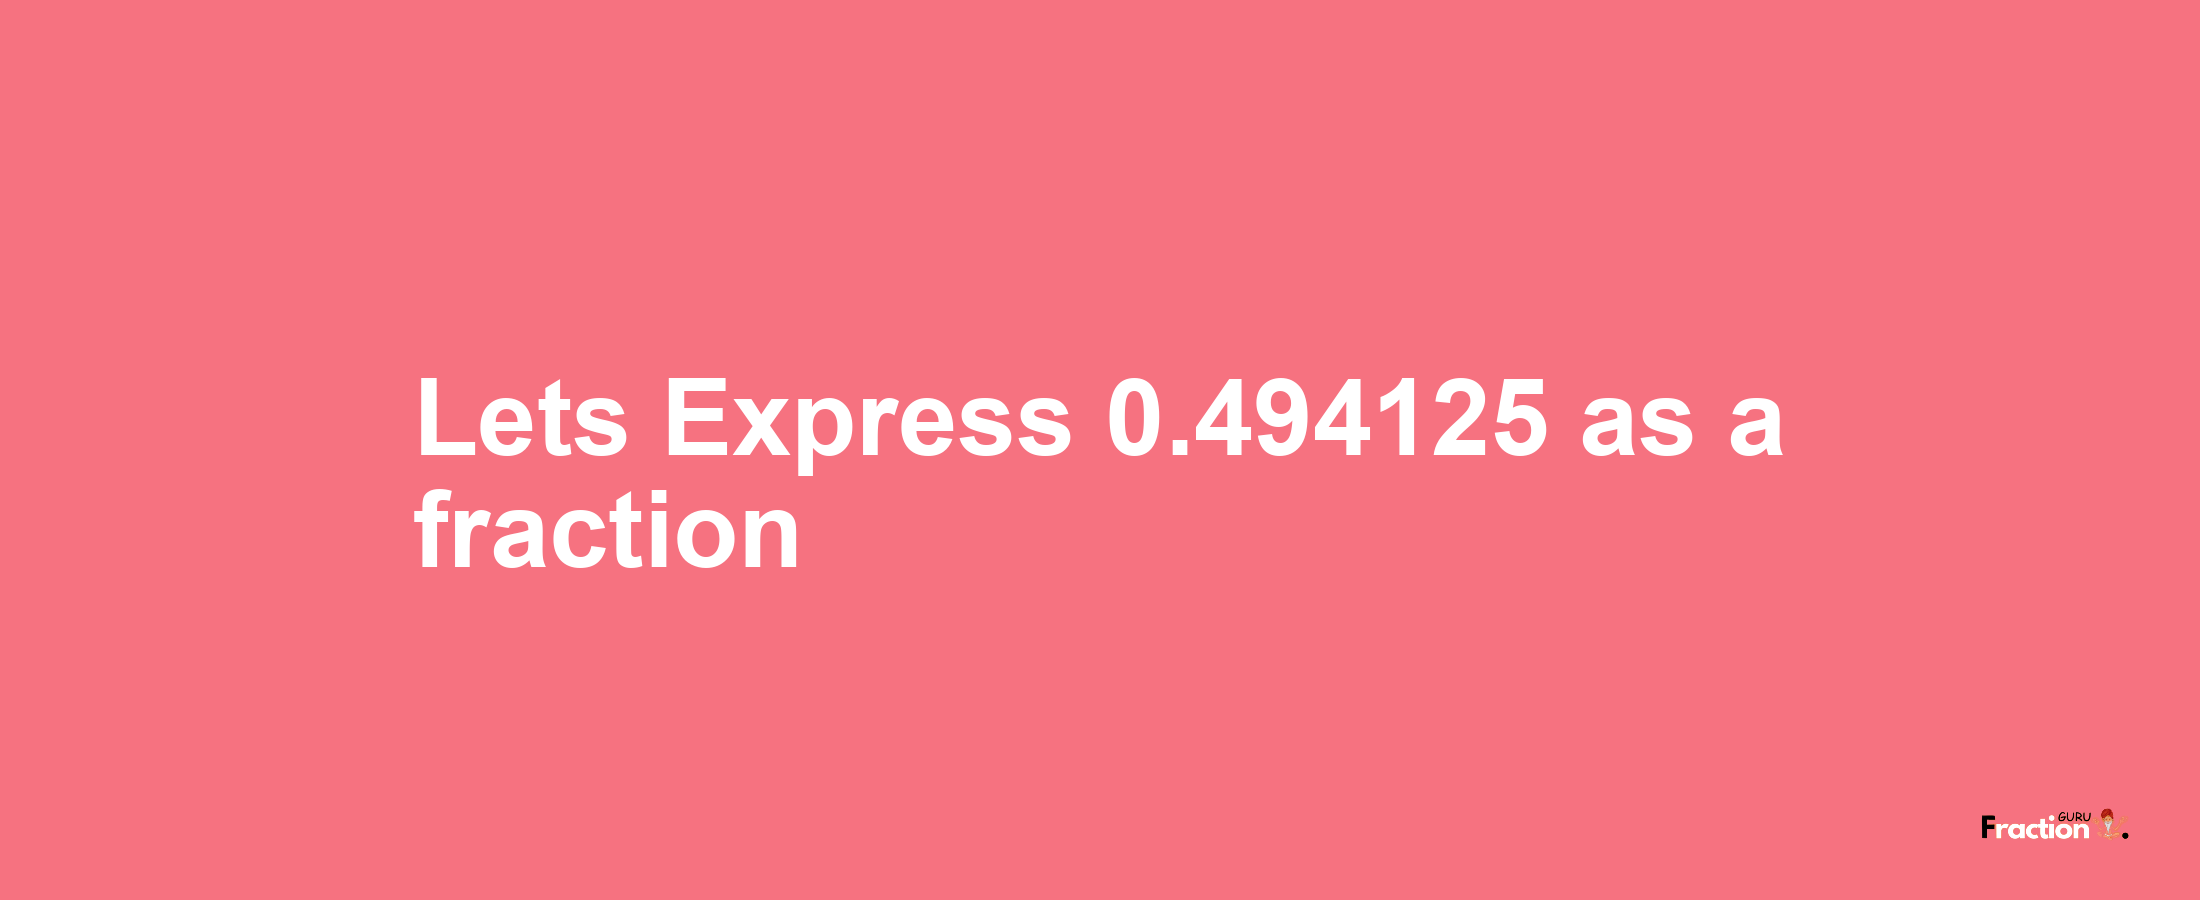 Lets Express 0.494125 as afraction